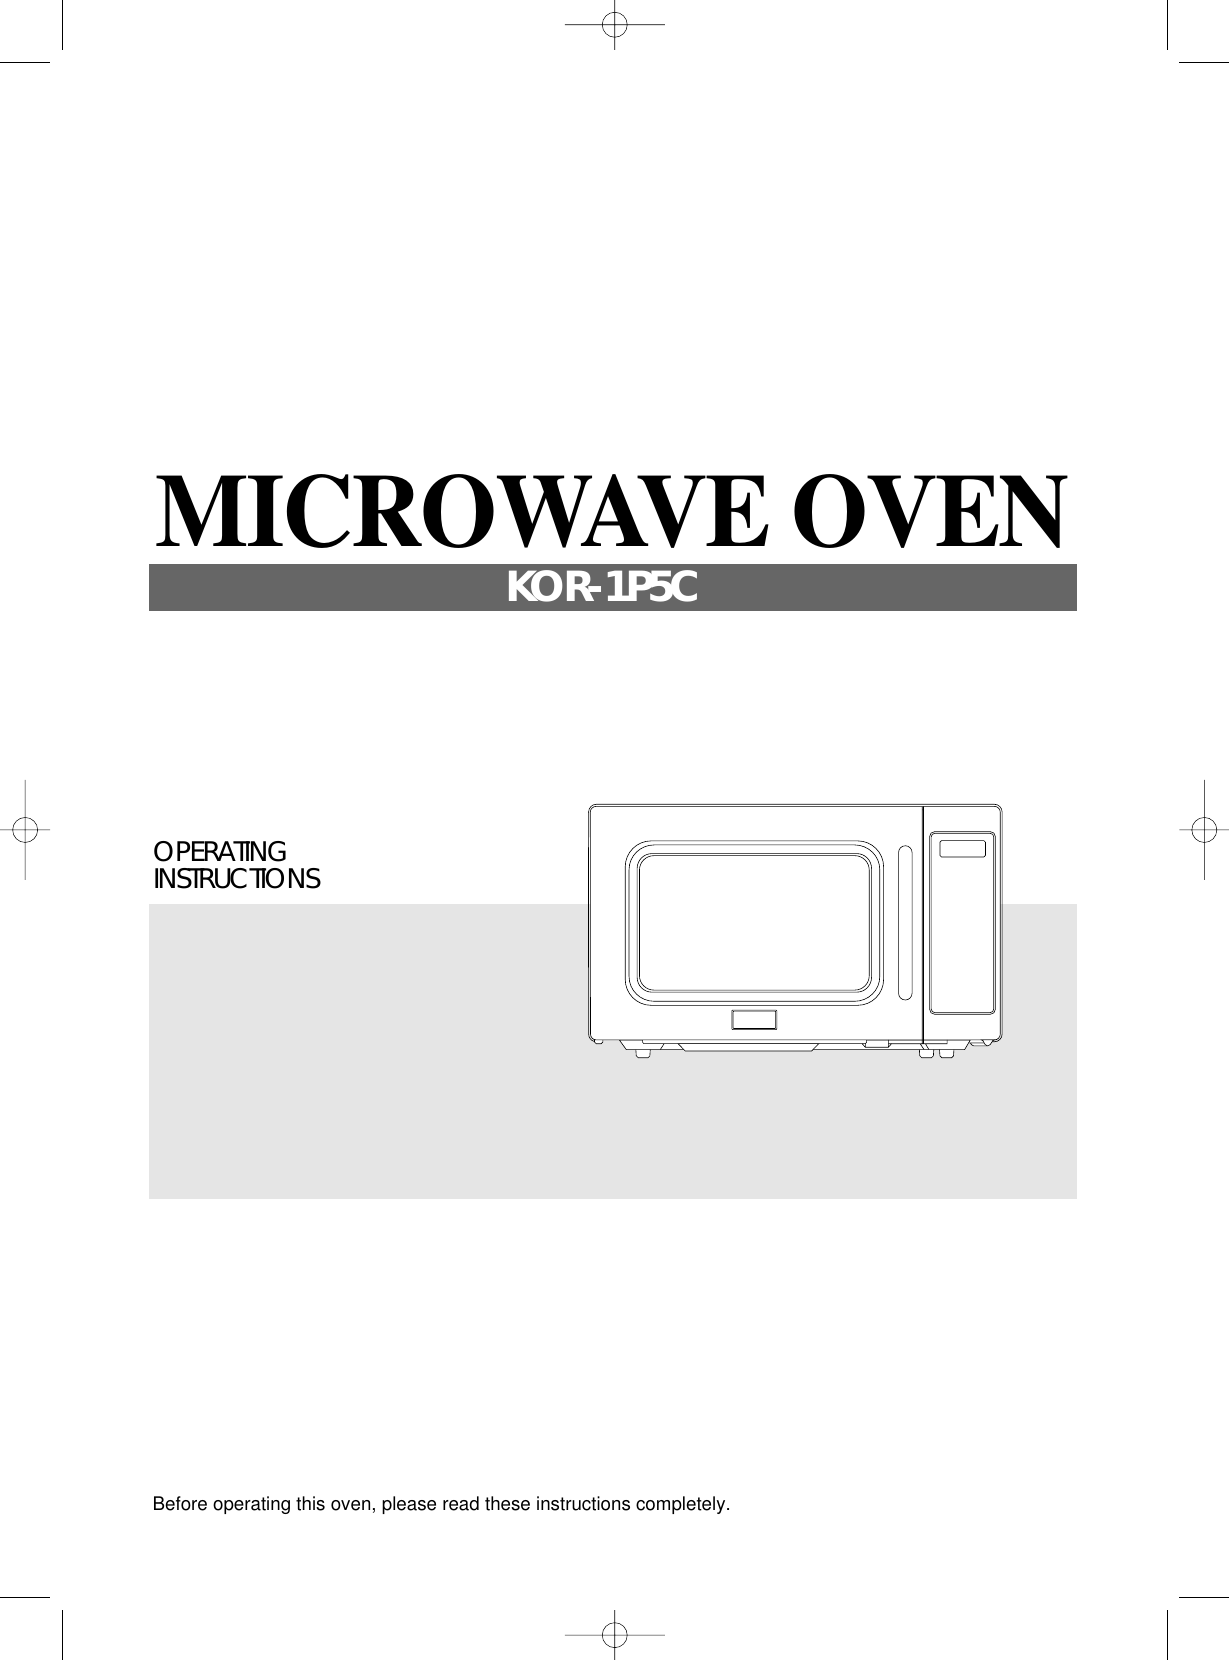 Before operating this oven, please read these instructions completely.OPERATINGINSTRUCTIONSMICROWAVE OVENKOR-1P5C